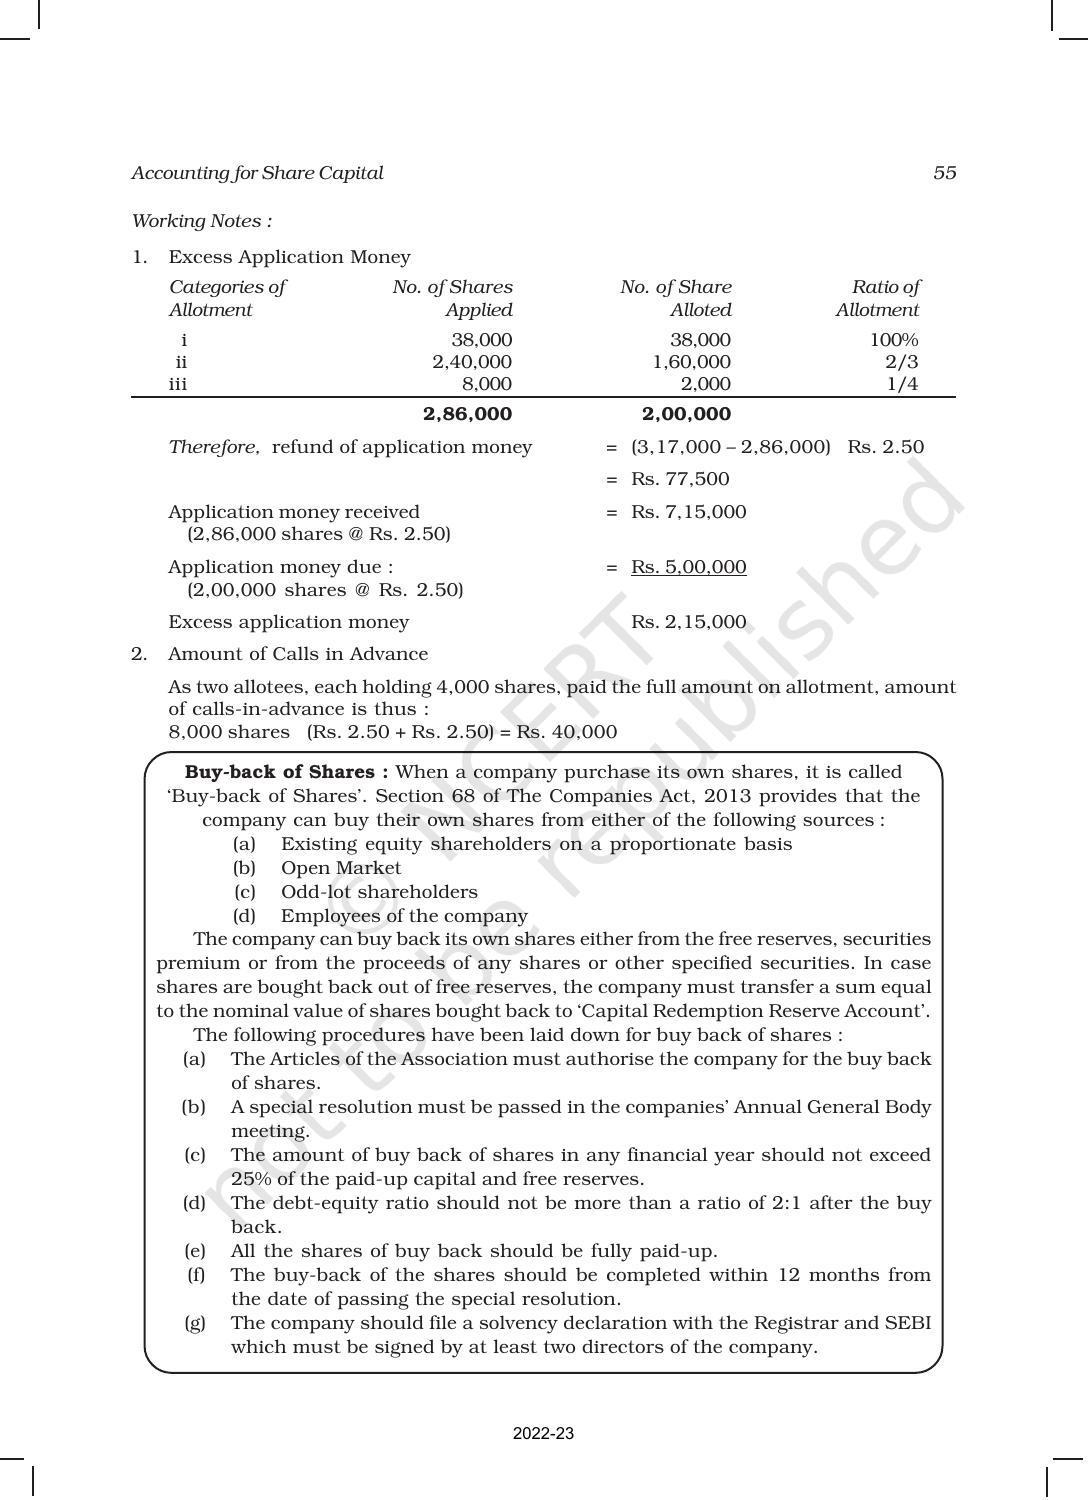 NCERT Book for Class 12 Accountancy Part II Chapter 1 Accounting for Share Capital - Page 55